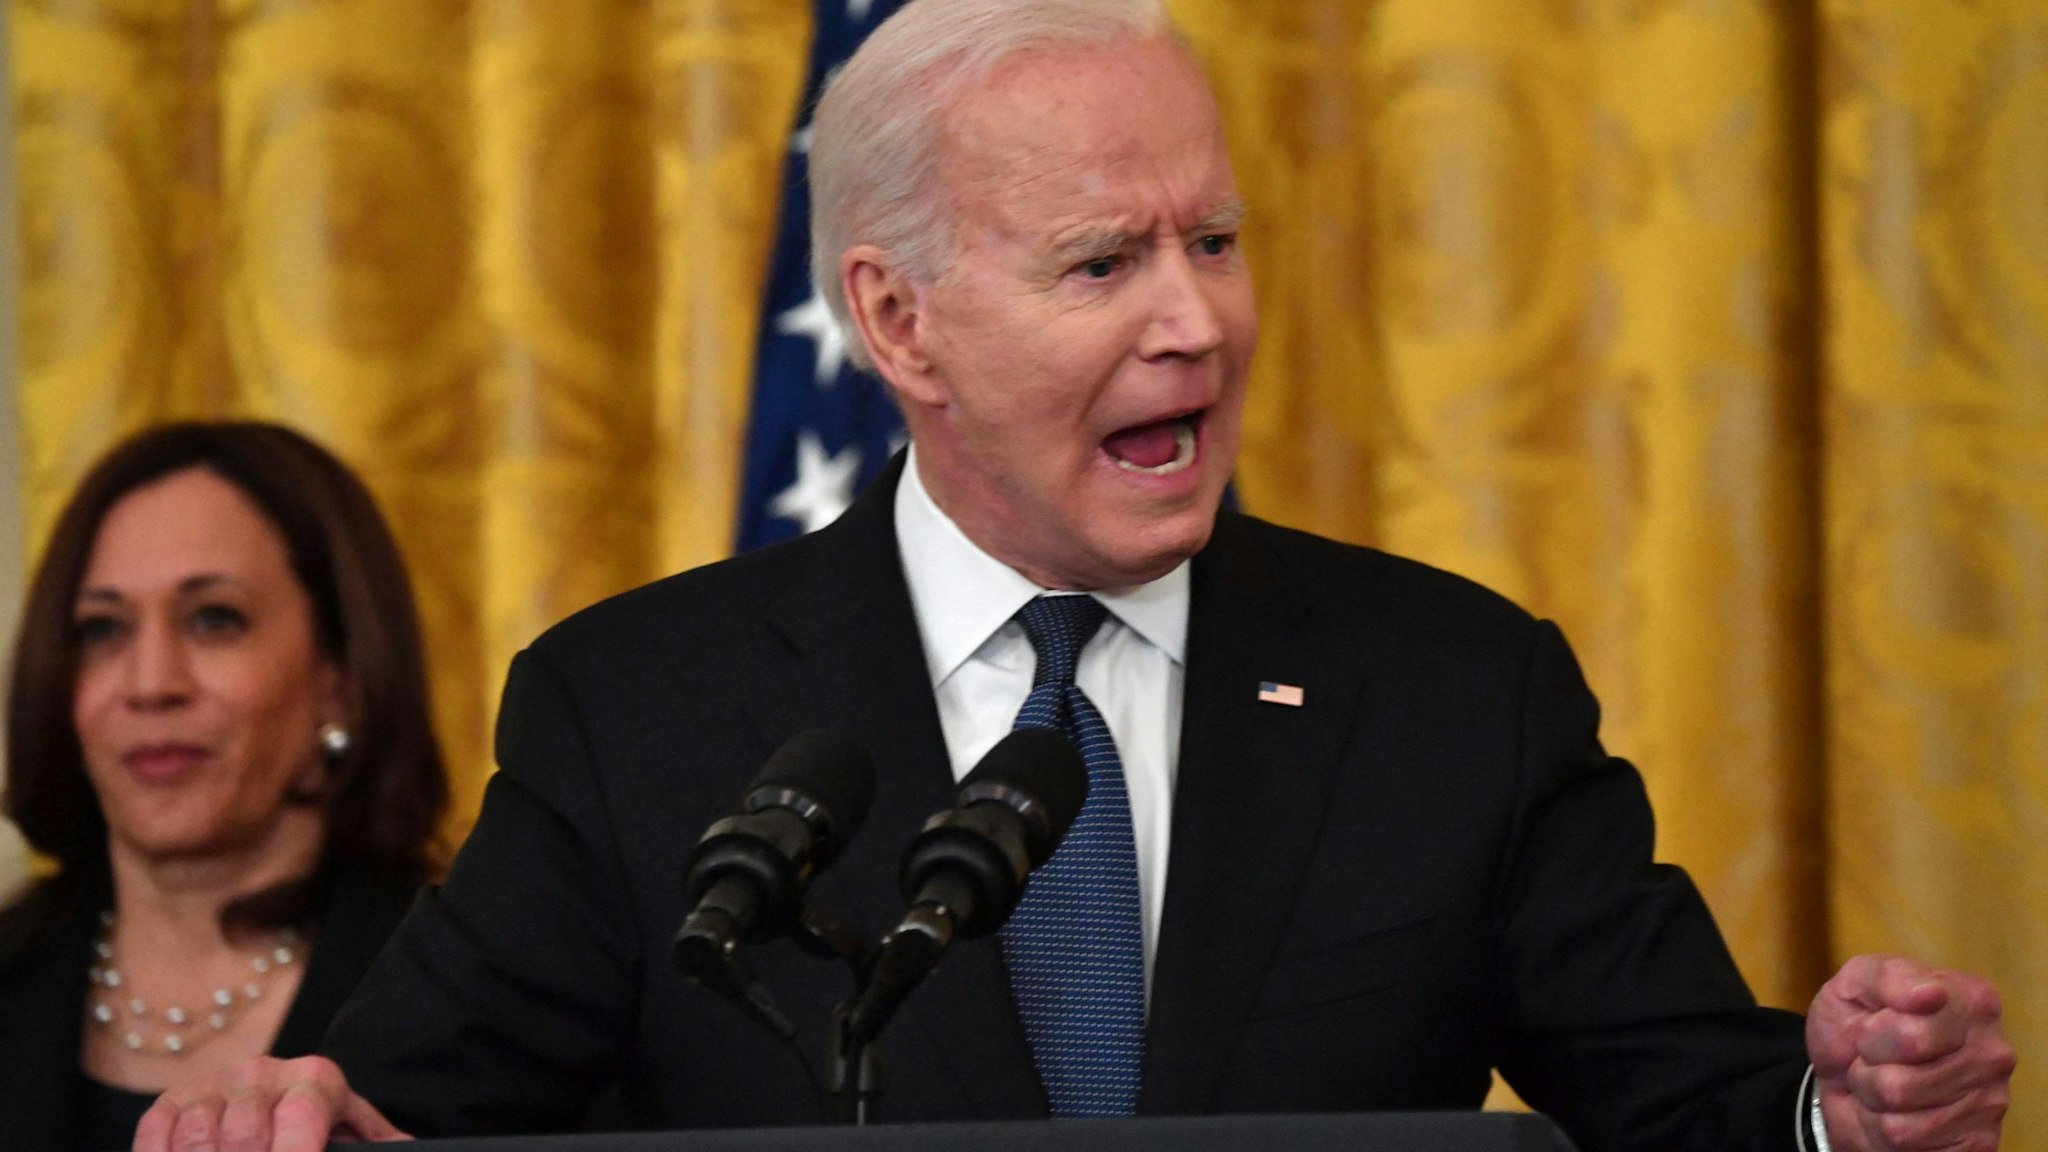 US President Joe Biden speaks before signing the Covid-19 Hate Crimes Act, in the East Room of the White House in Washington, DC on May 20, 2021.